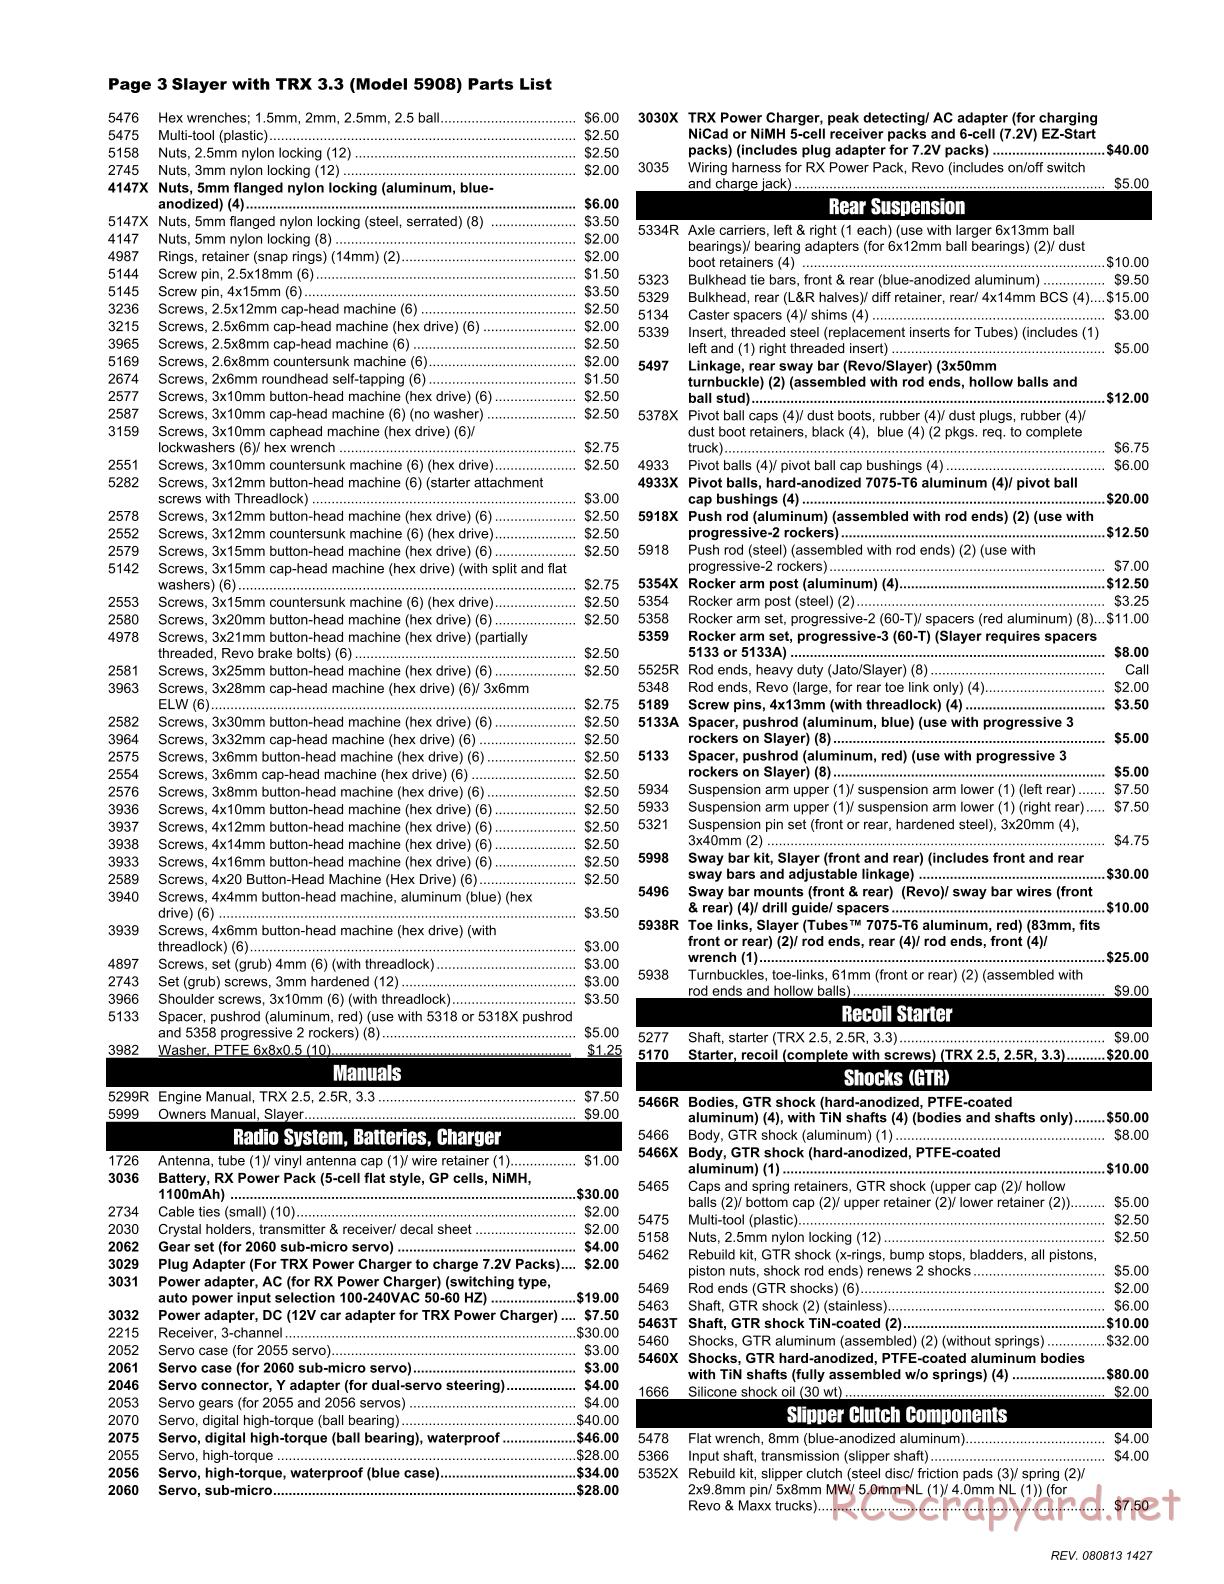 Traxxas - Slayer Pro 4WD (2008) - Parts List - Page 3